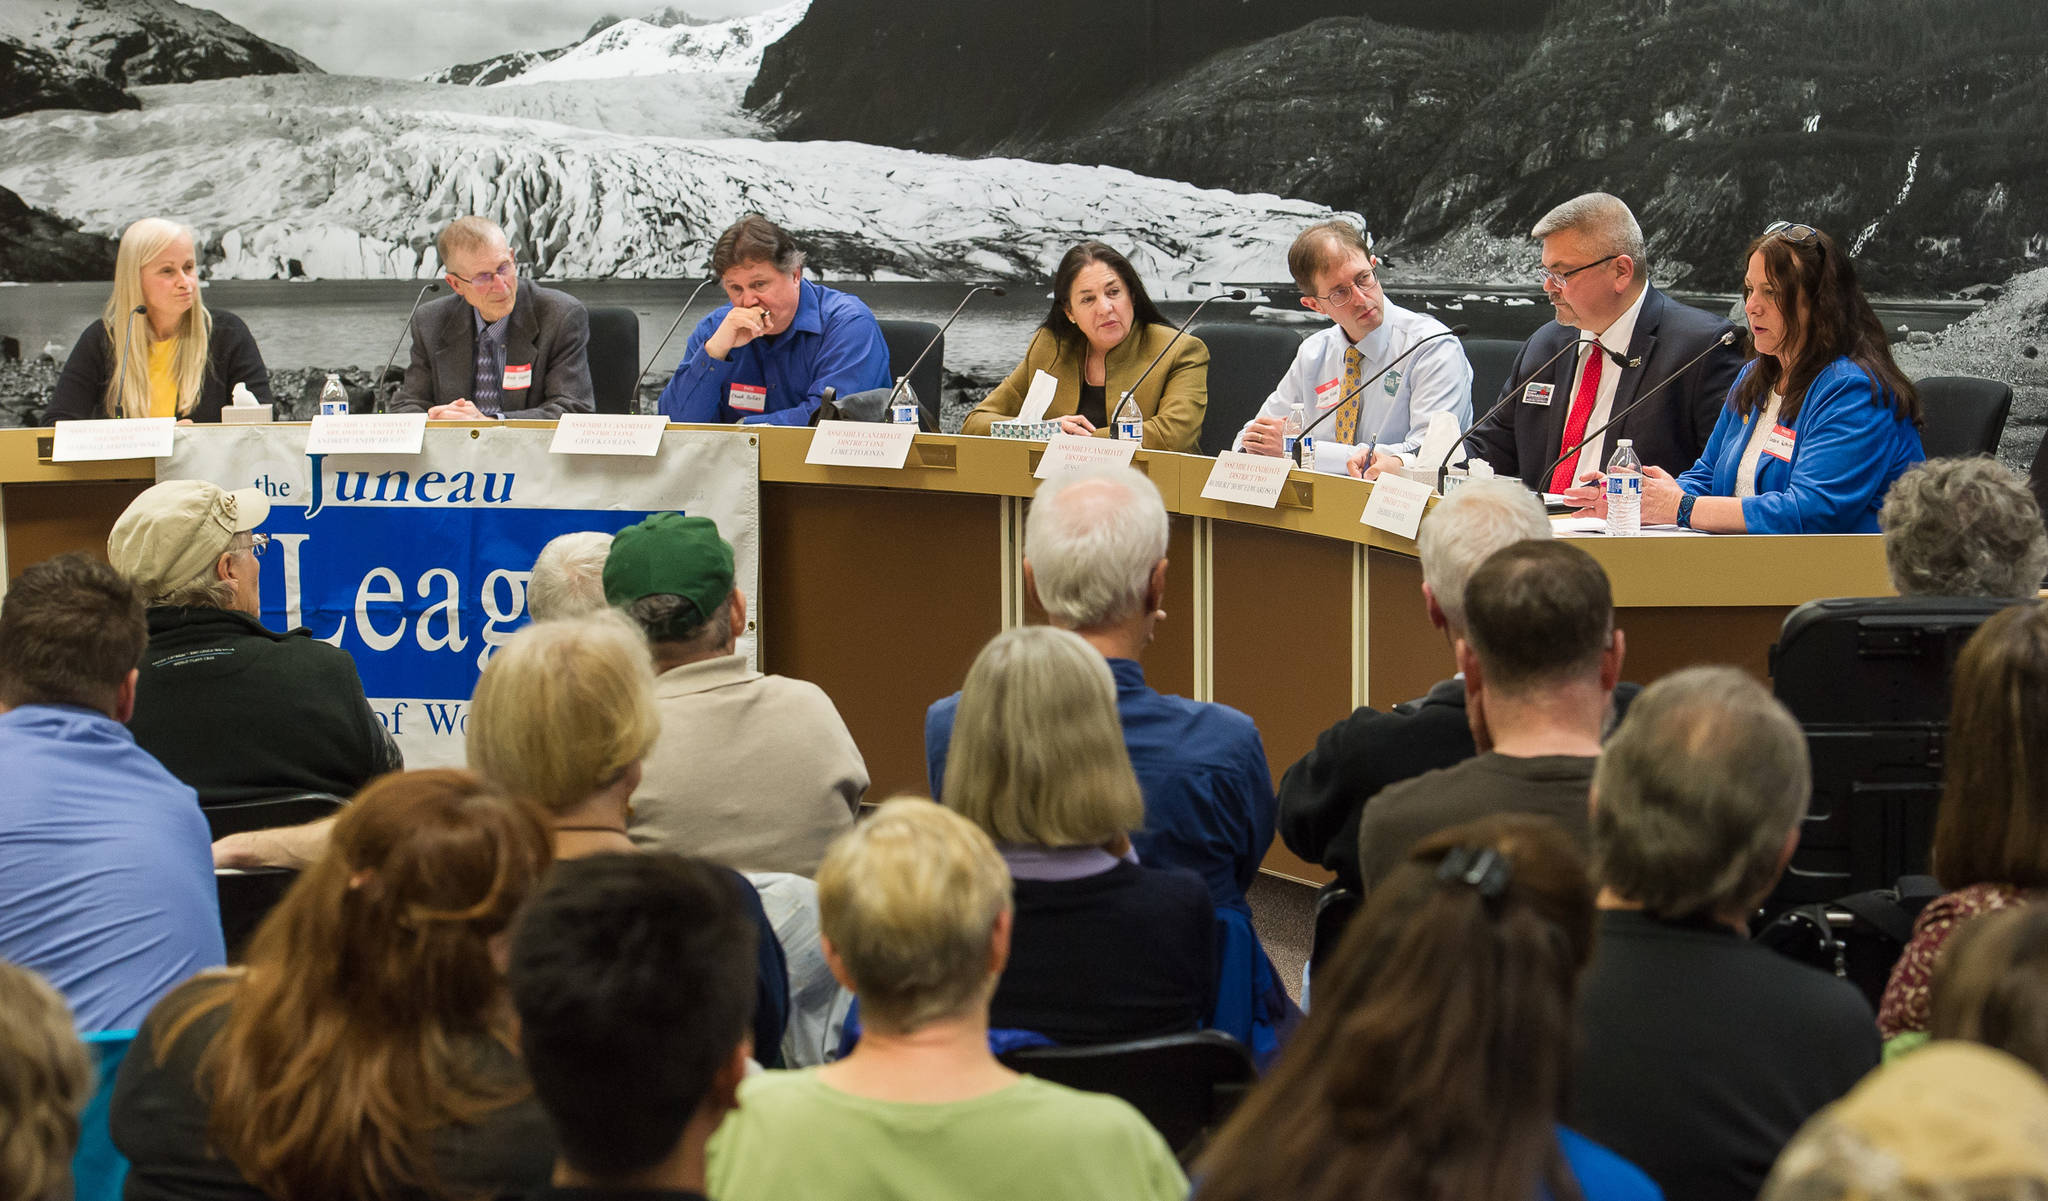 Assembly candidates Maria Gladziszewski, left, Andrew Hughes, Chuck Collins, Loretto Jones, Jesse Kiehl, Robert Edwardson, and Debbie White participate in the Juneau League of Women Voters forum in the Assembly chambers on Thursday, Sept. 14, 2017. (Michael Penn | Juneau Empire)